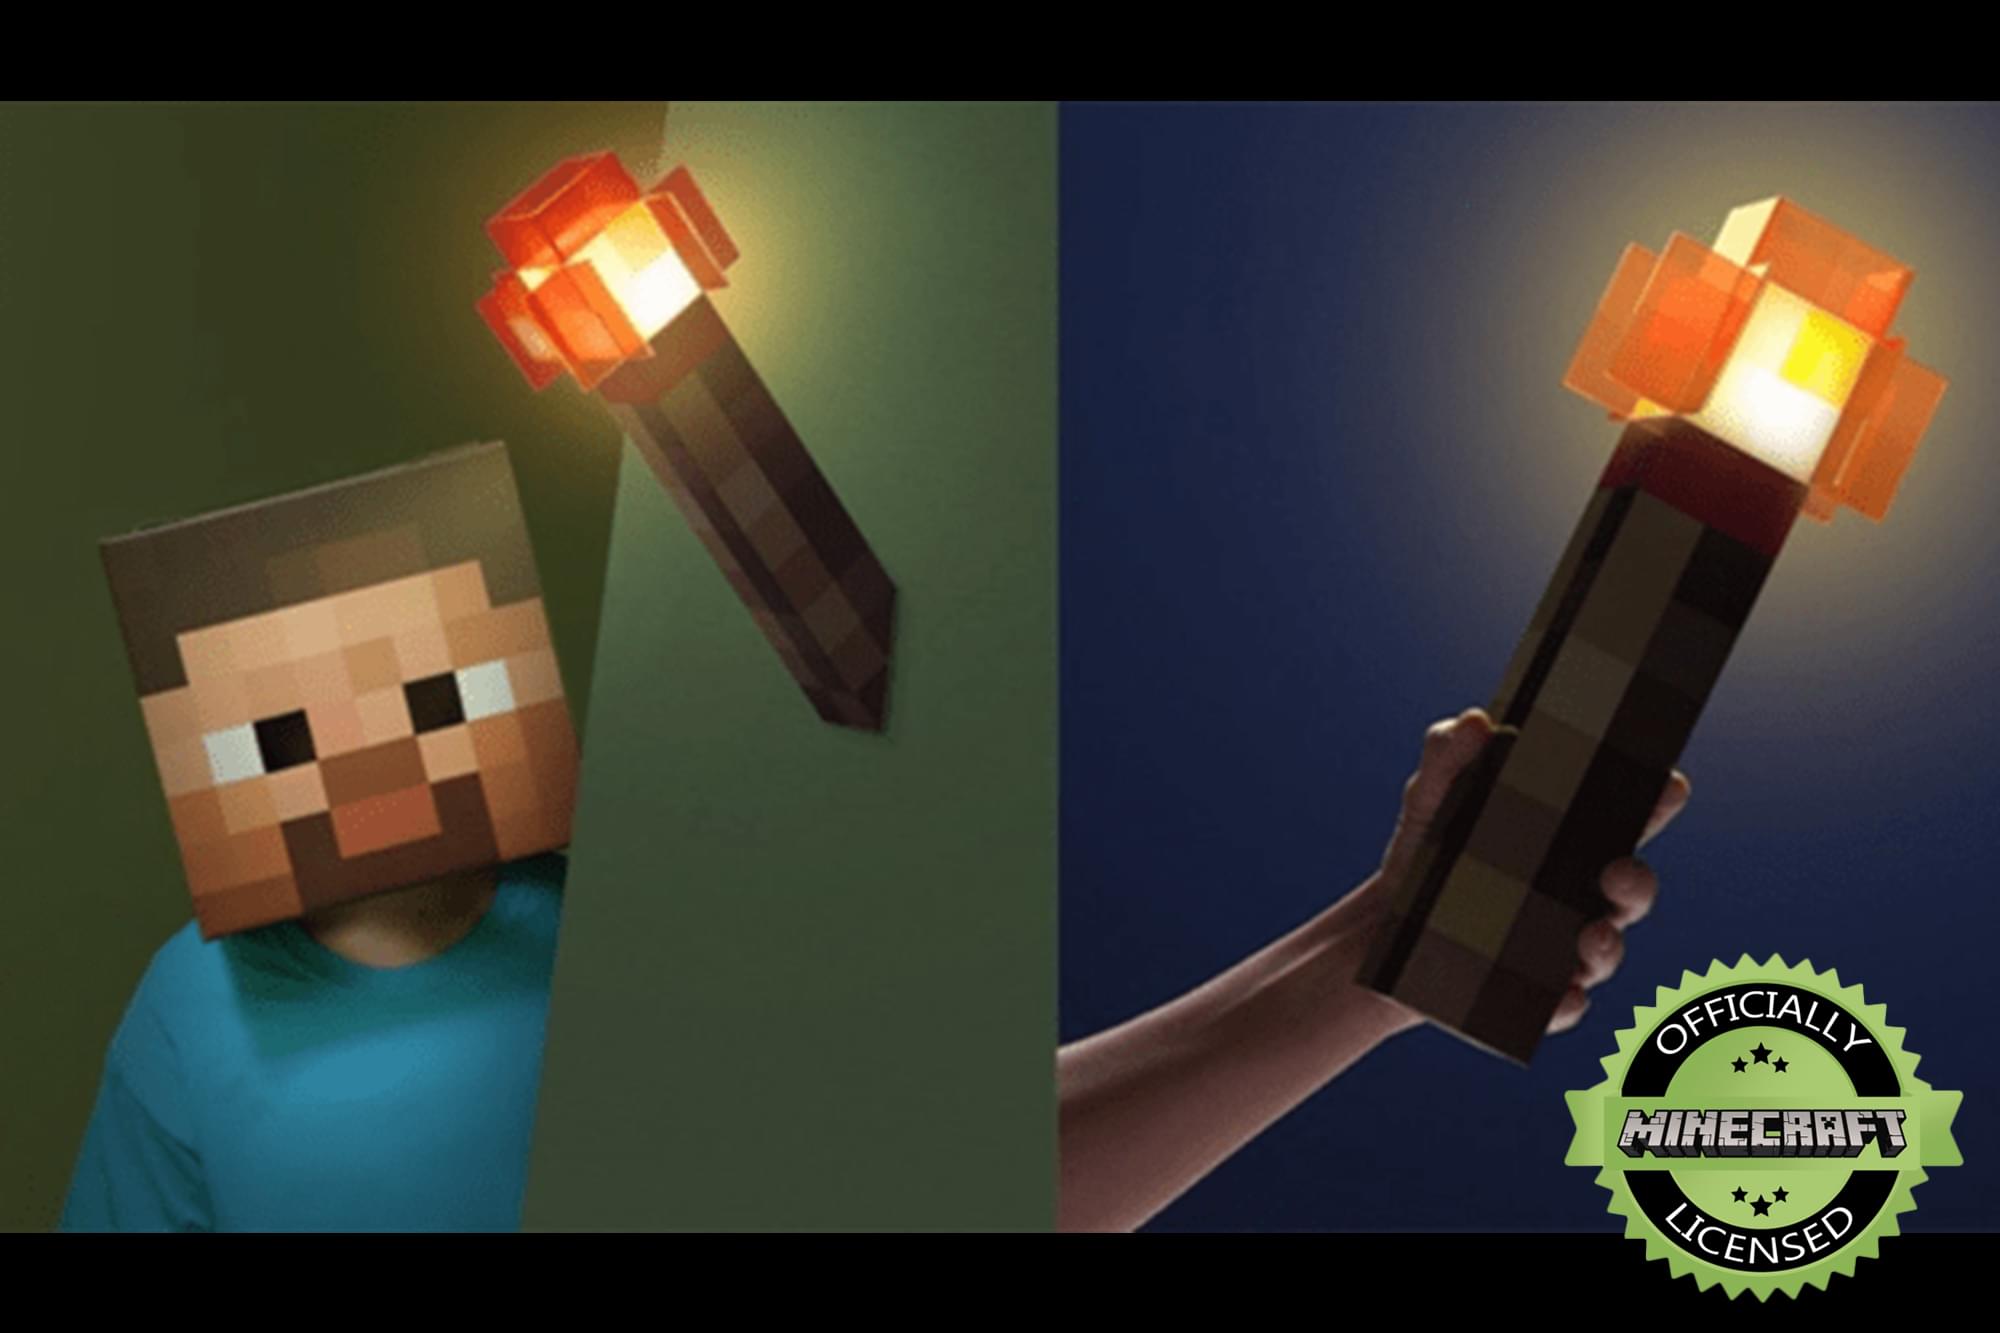 Minecraft Redstone Torch 12 6 Inch Led Lamp Free Shipping Toynk Toys